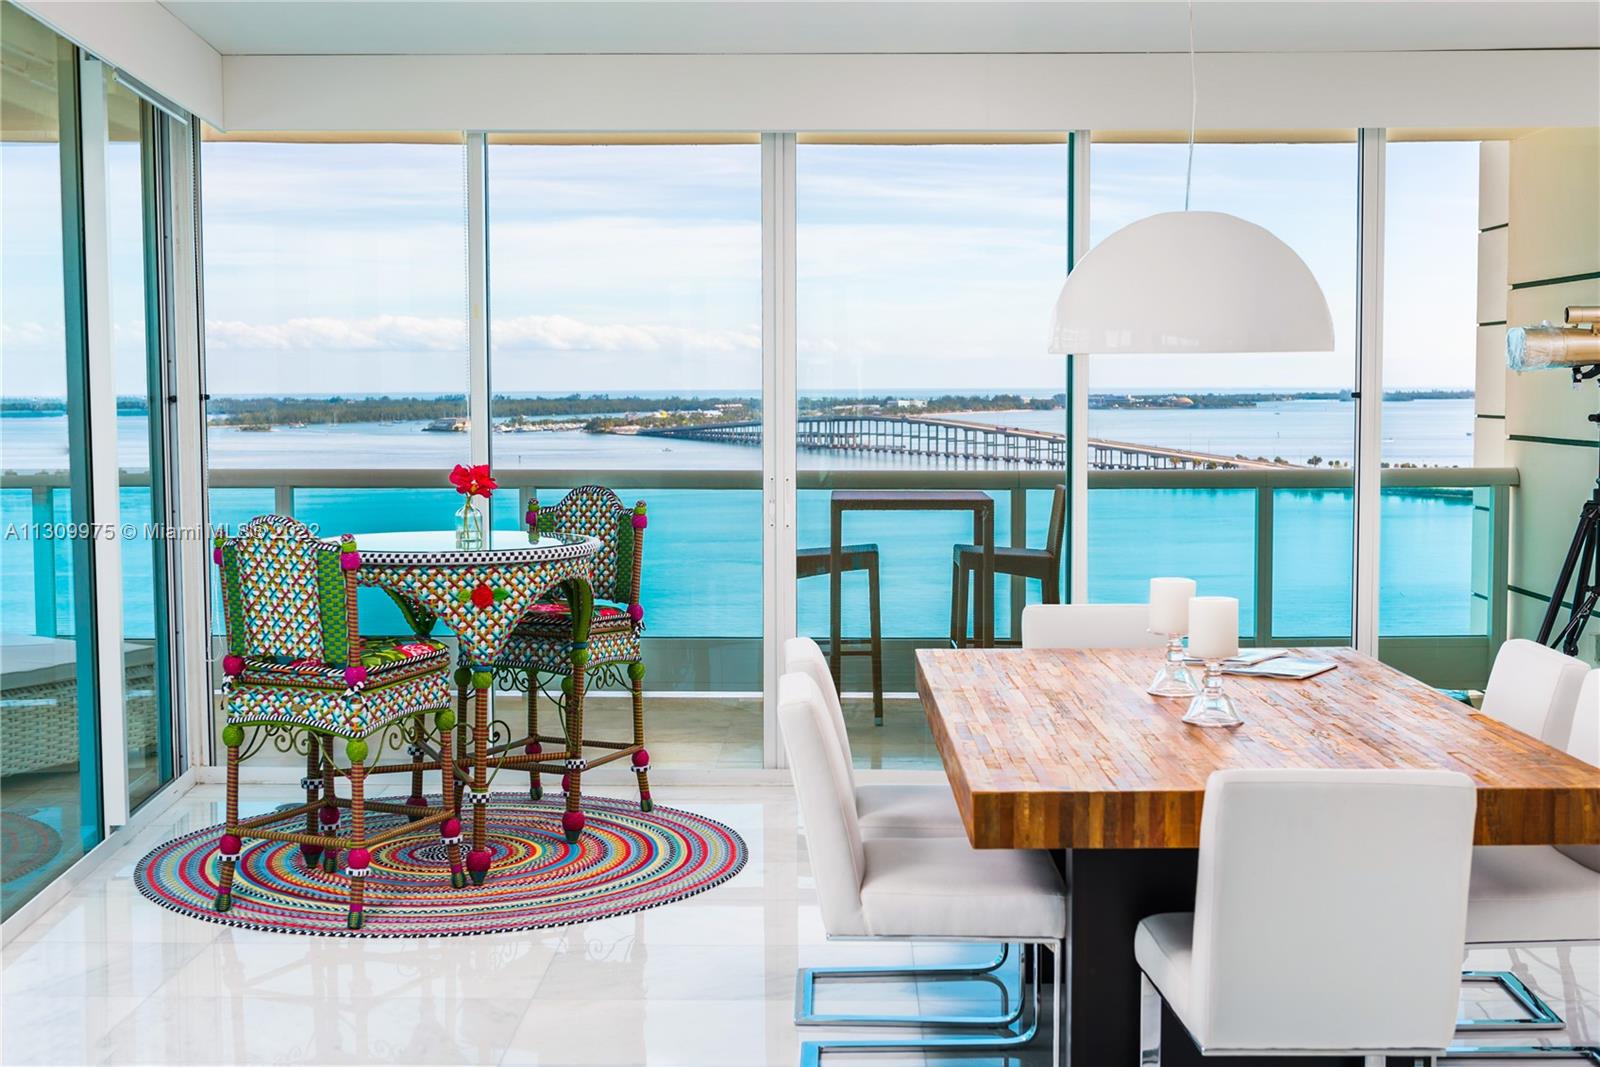 Located on Brickell's green mile, this property at BRISTOL TOWER is a unique find. Private entrance lead to striking water views. COMPLETE updated unit 2 Bd, 2.5 Bth, separate laundry area, 2,070 sq ft L.A.. Light & bright gourmet kitchen. Wraparound balcony showcases an open air entertaining space with panoramic views of Key Biscayne Bay and Downtown Brickell.  Located near to I95 access, minutes from downtown financial, and direct access  to Key Biscayne Causeway.  Features include, marble floors, italian kitchen cabinets, Crestron, Wolf, Subzero, Electrolux washer/dryer and much more!